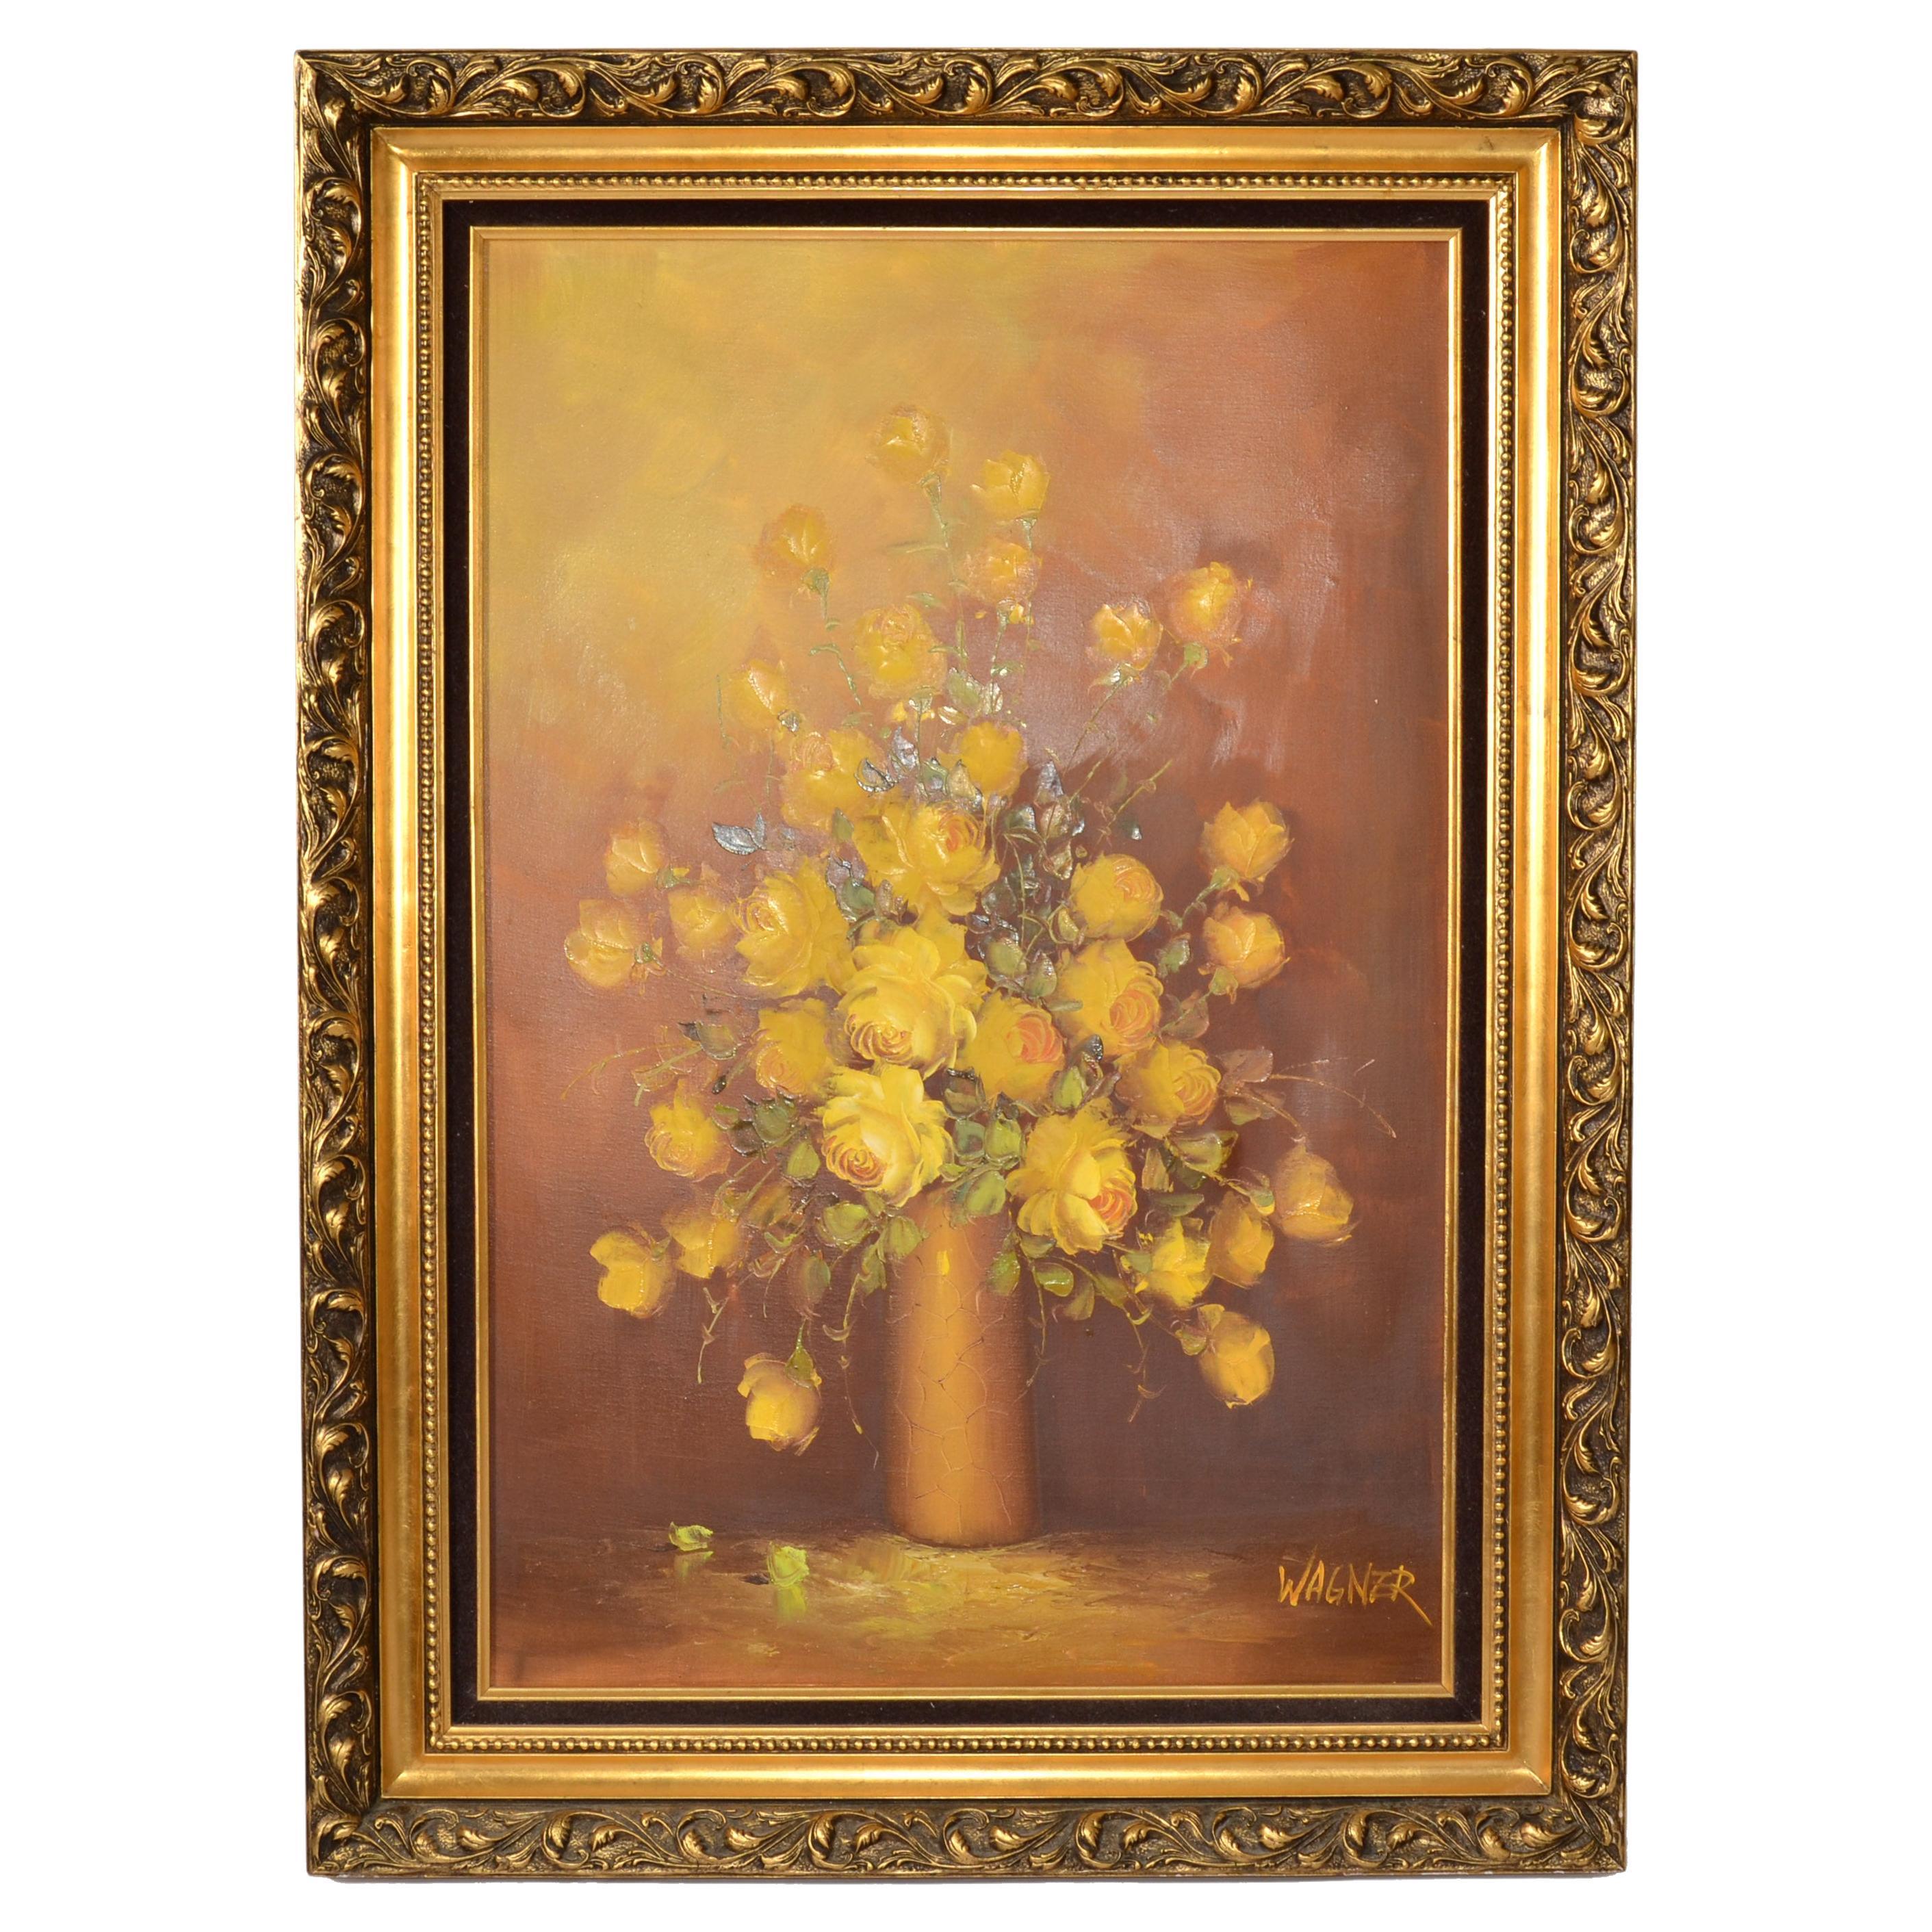 F. Wagner Framed Classical Floral Still Life Roses Painting Oil on Canvas, 1972 For Sale